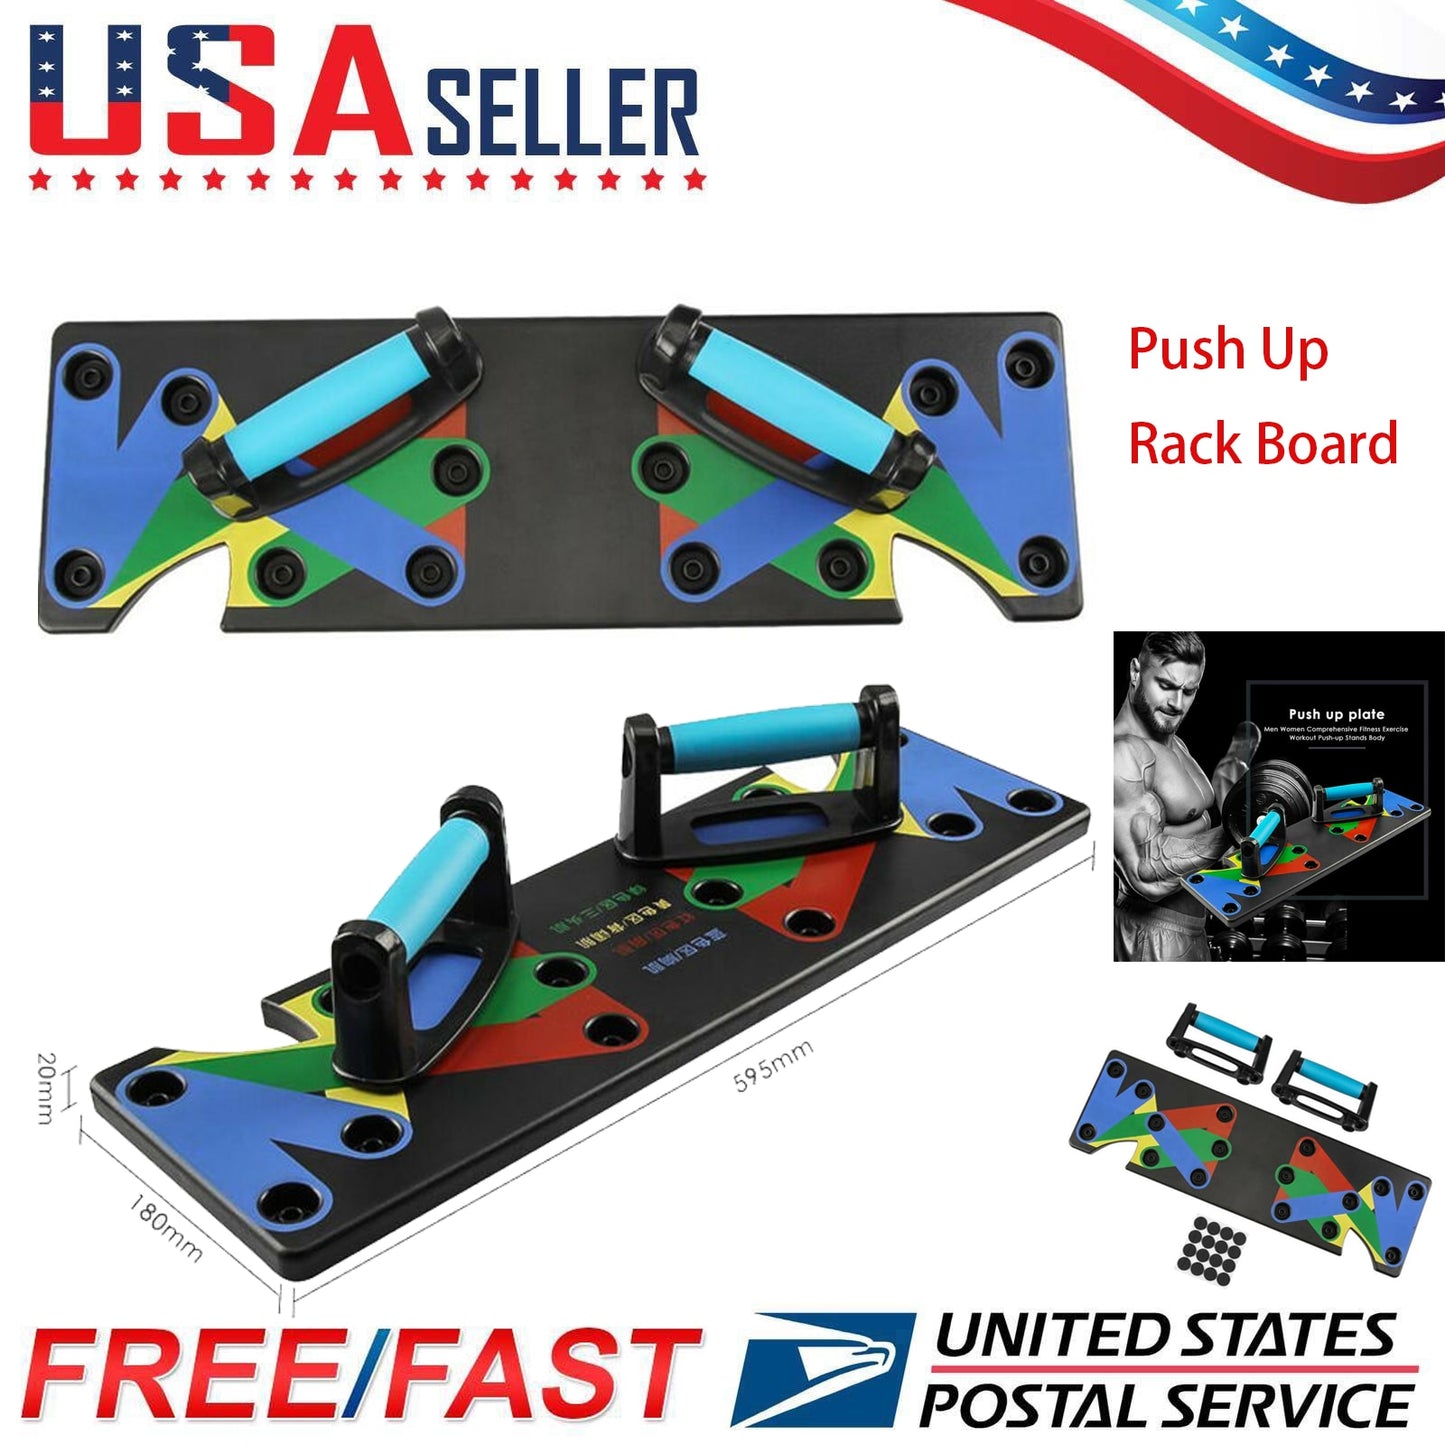 9 In 1 Body Building Push Up Rack Board System Fitness Workout Gym Push Up Stand Muscle Training Exercise Tool